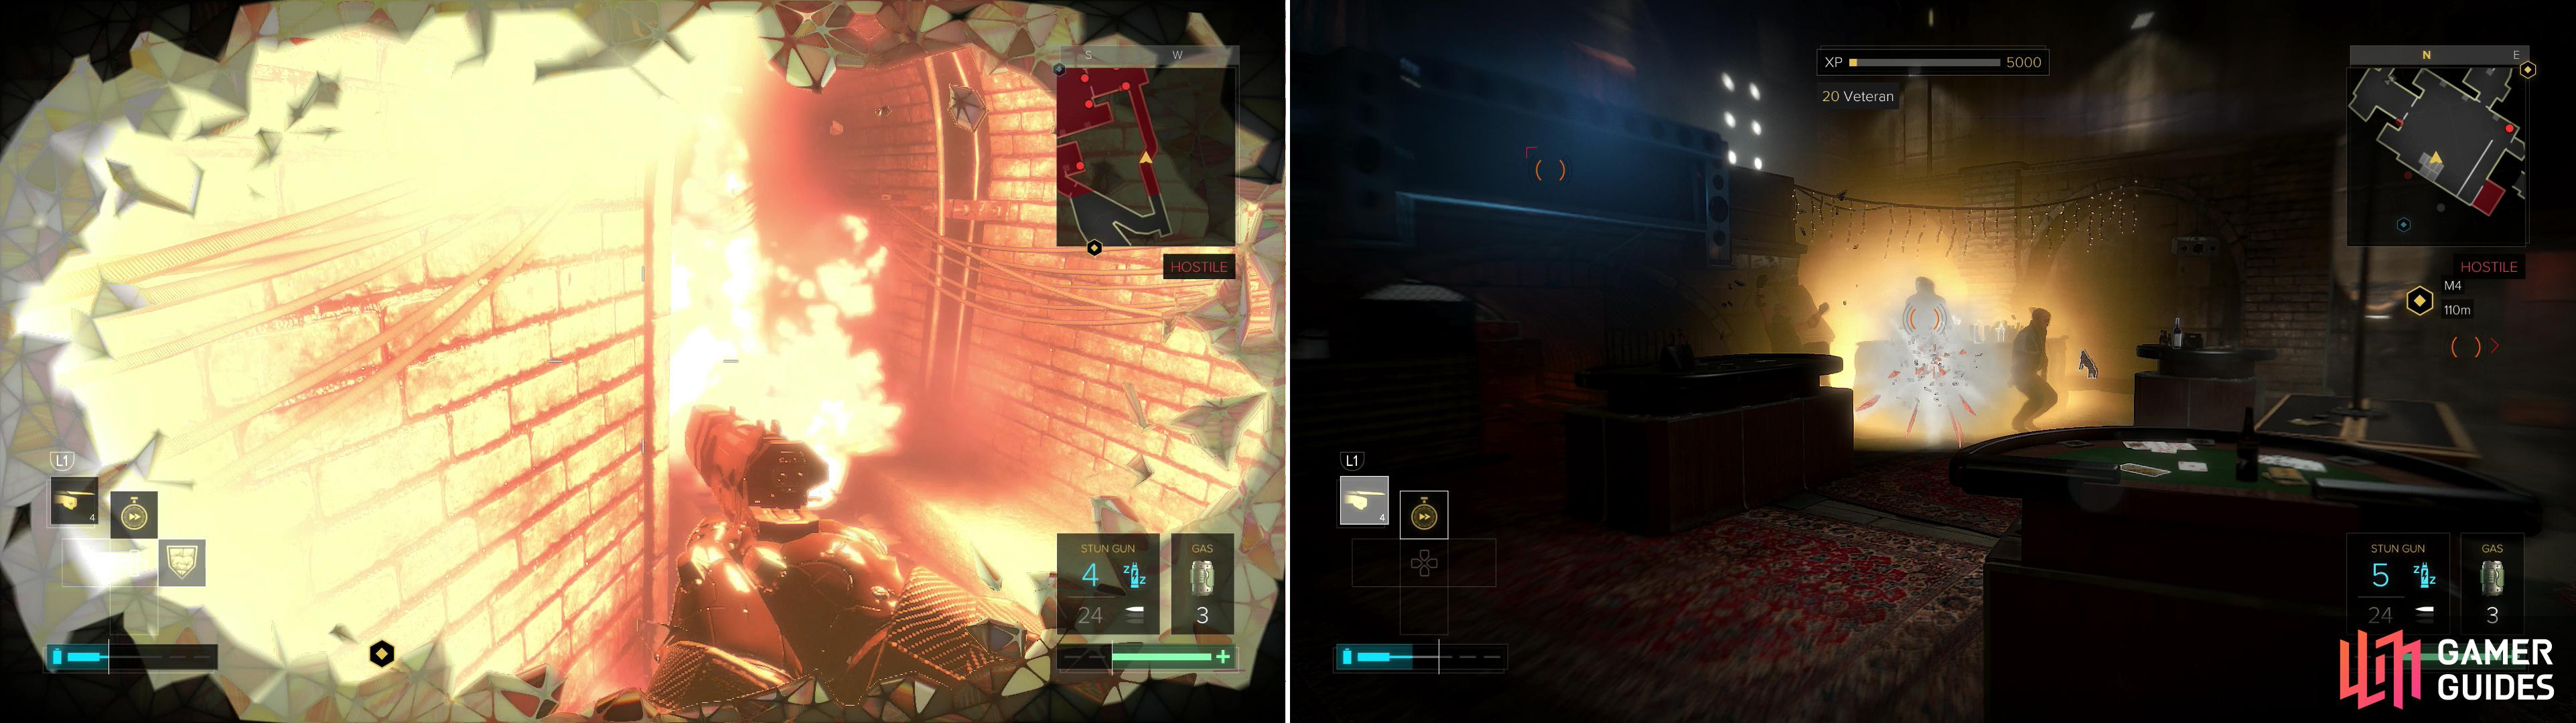 Hug an explosive with the "Titan" augmentation active to earn a trophy/achievement (left). Charging up your Nanoblade to strike tree enemies while the "Focus" augmentation is active will earn you another (right).